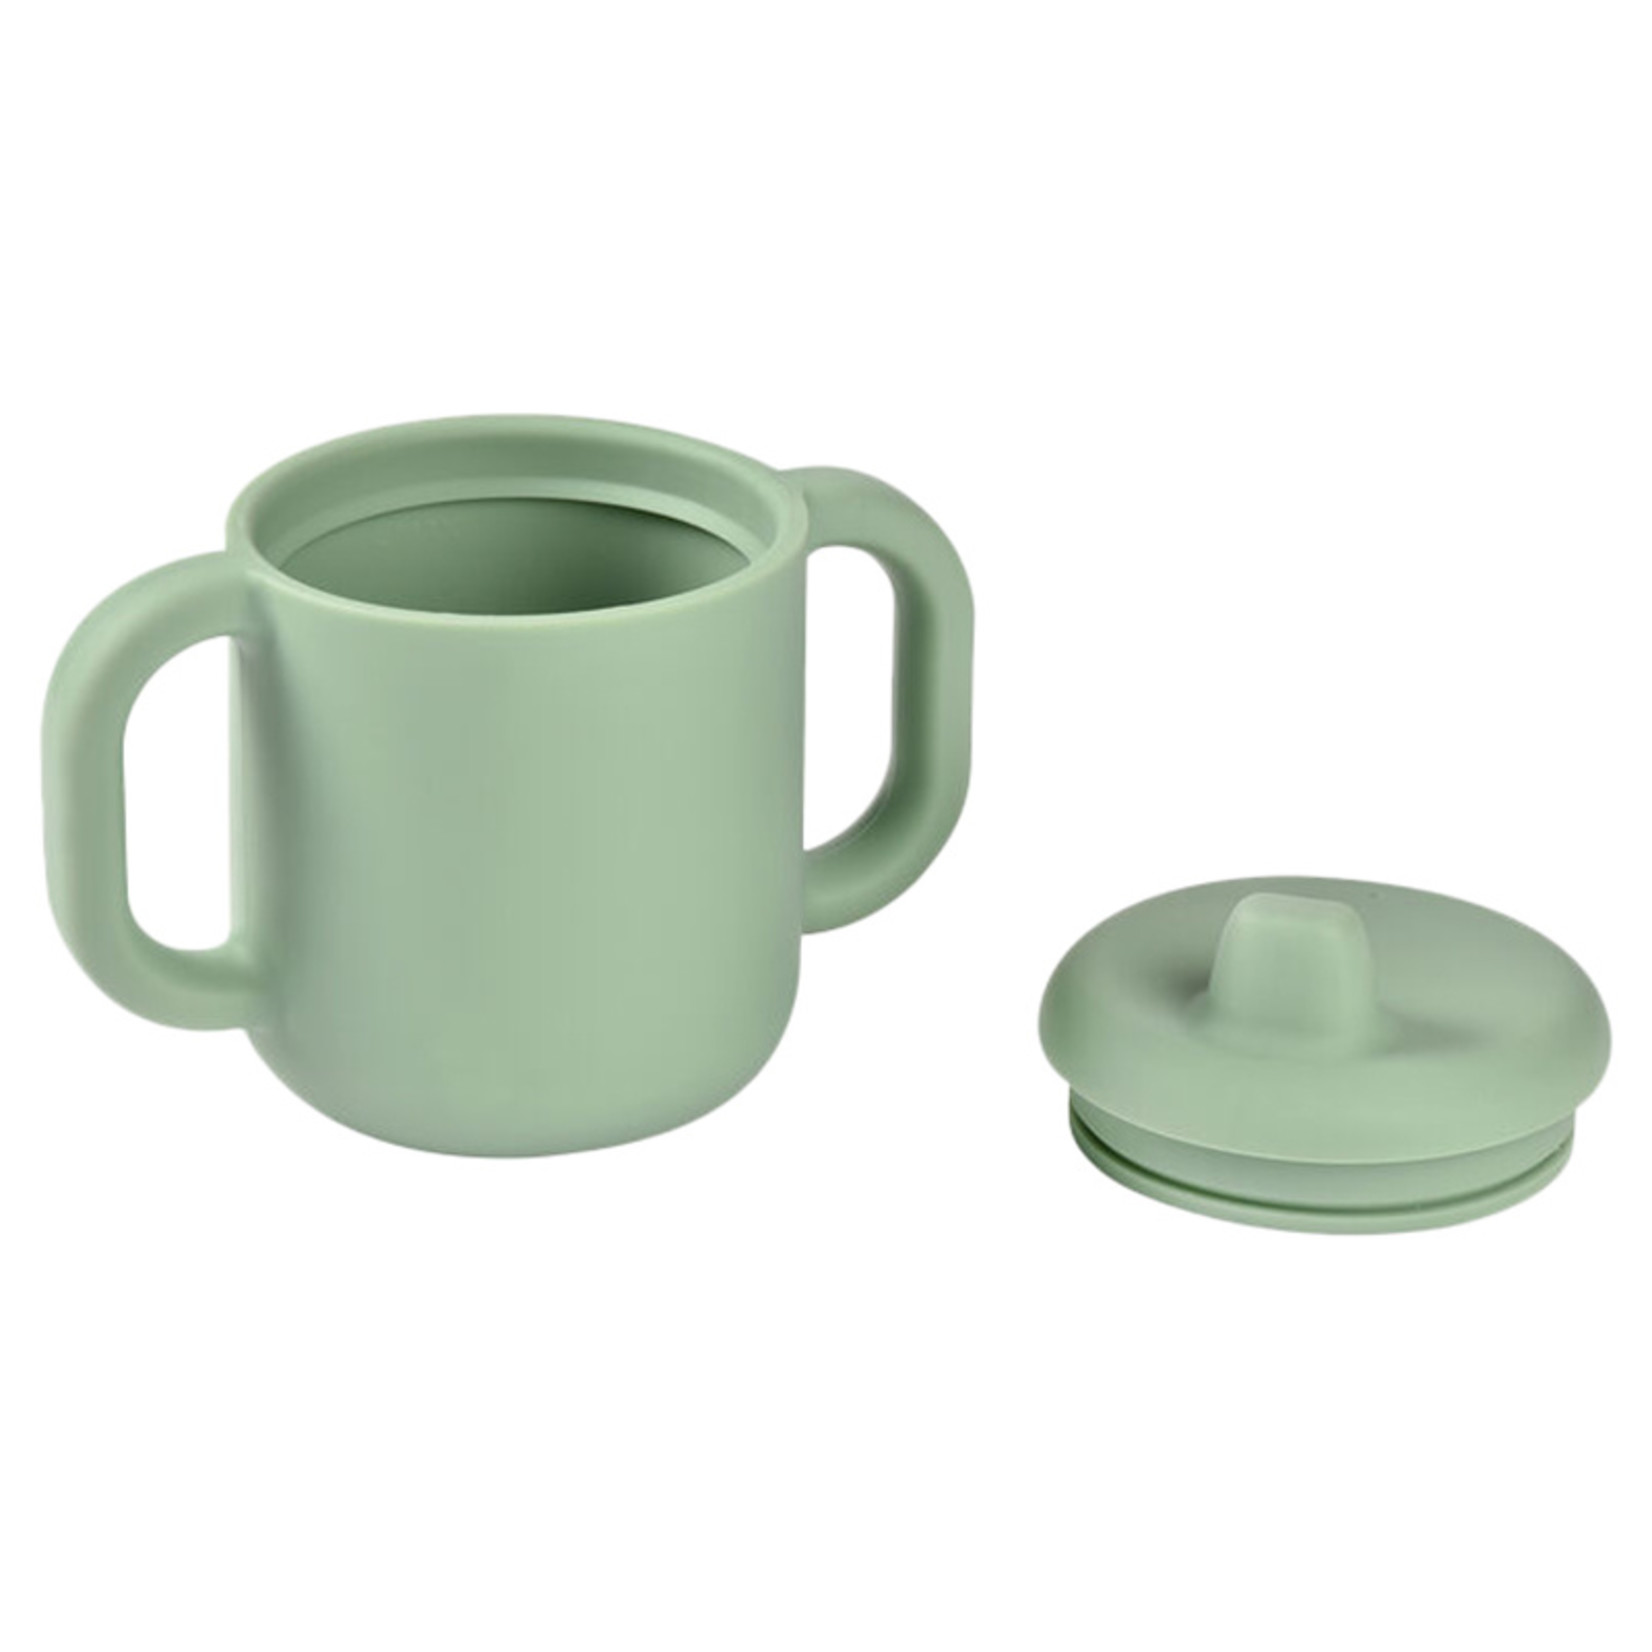 Learning Cup Sage Green